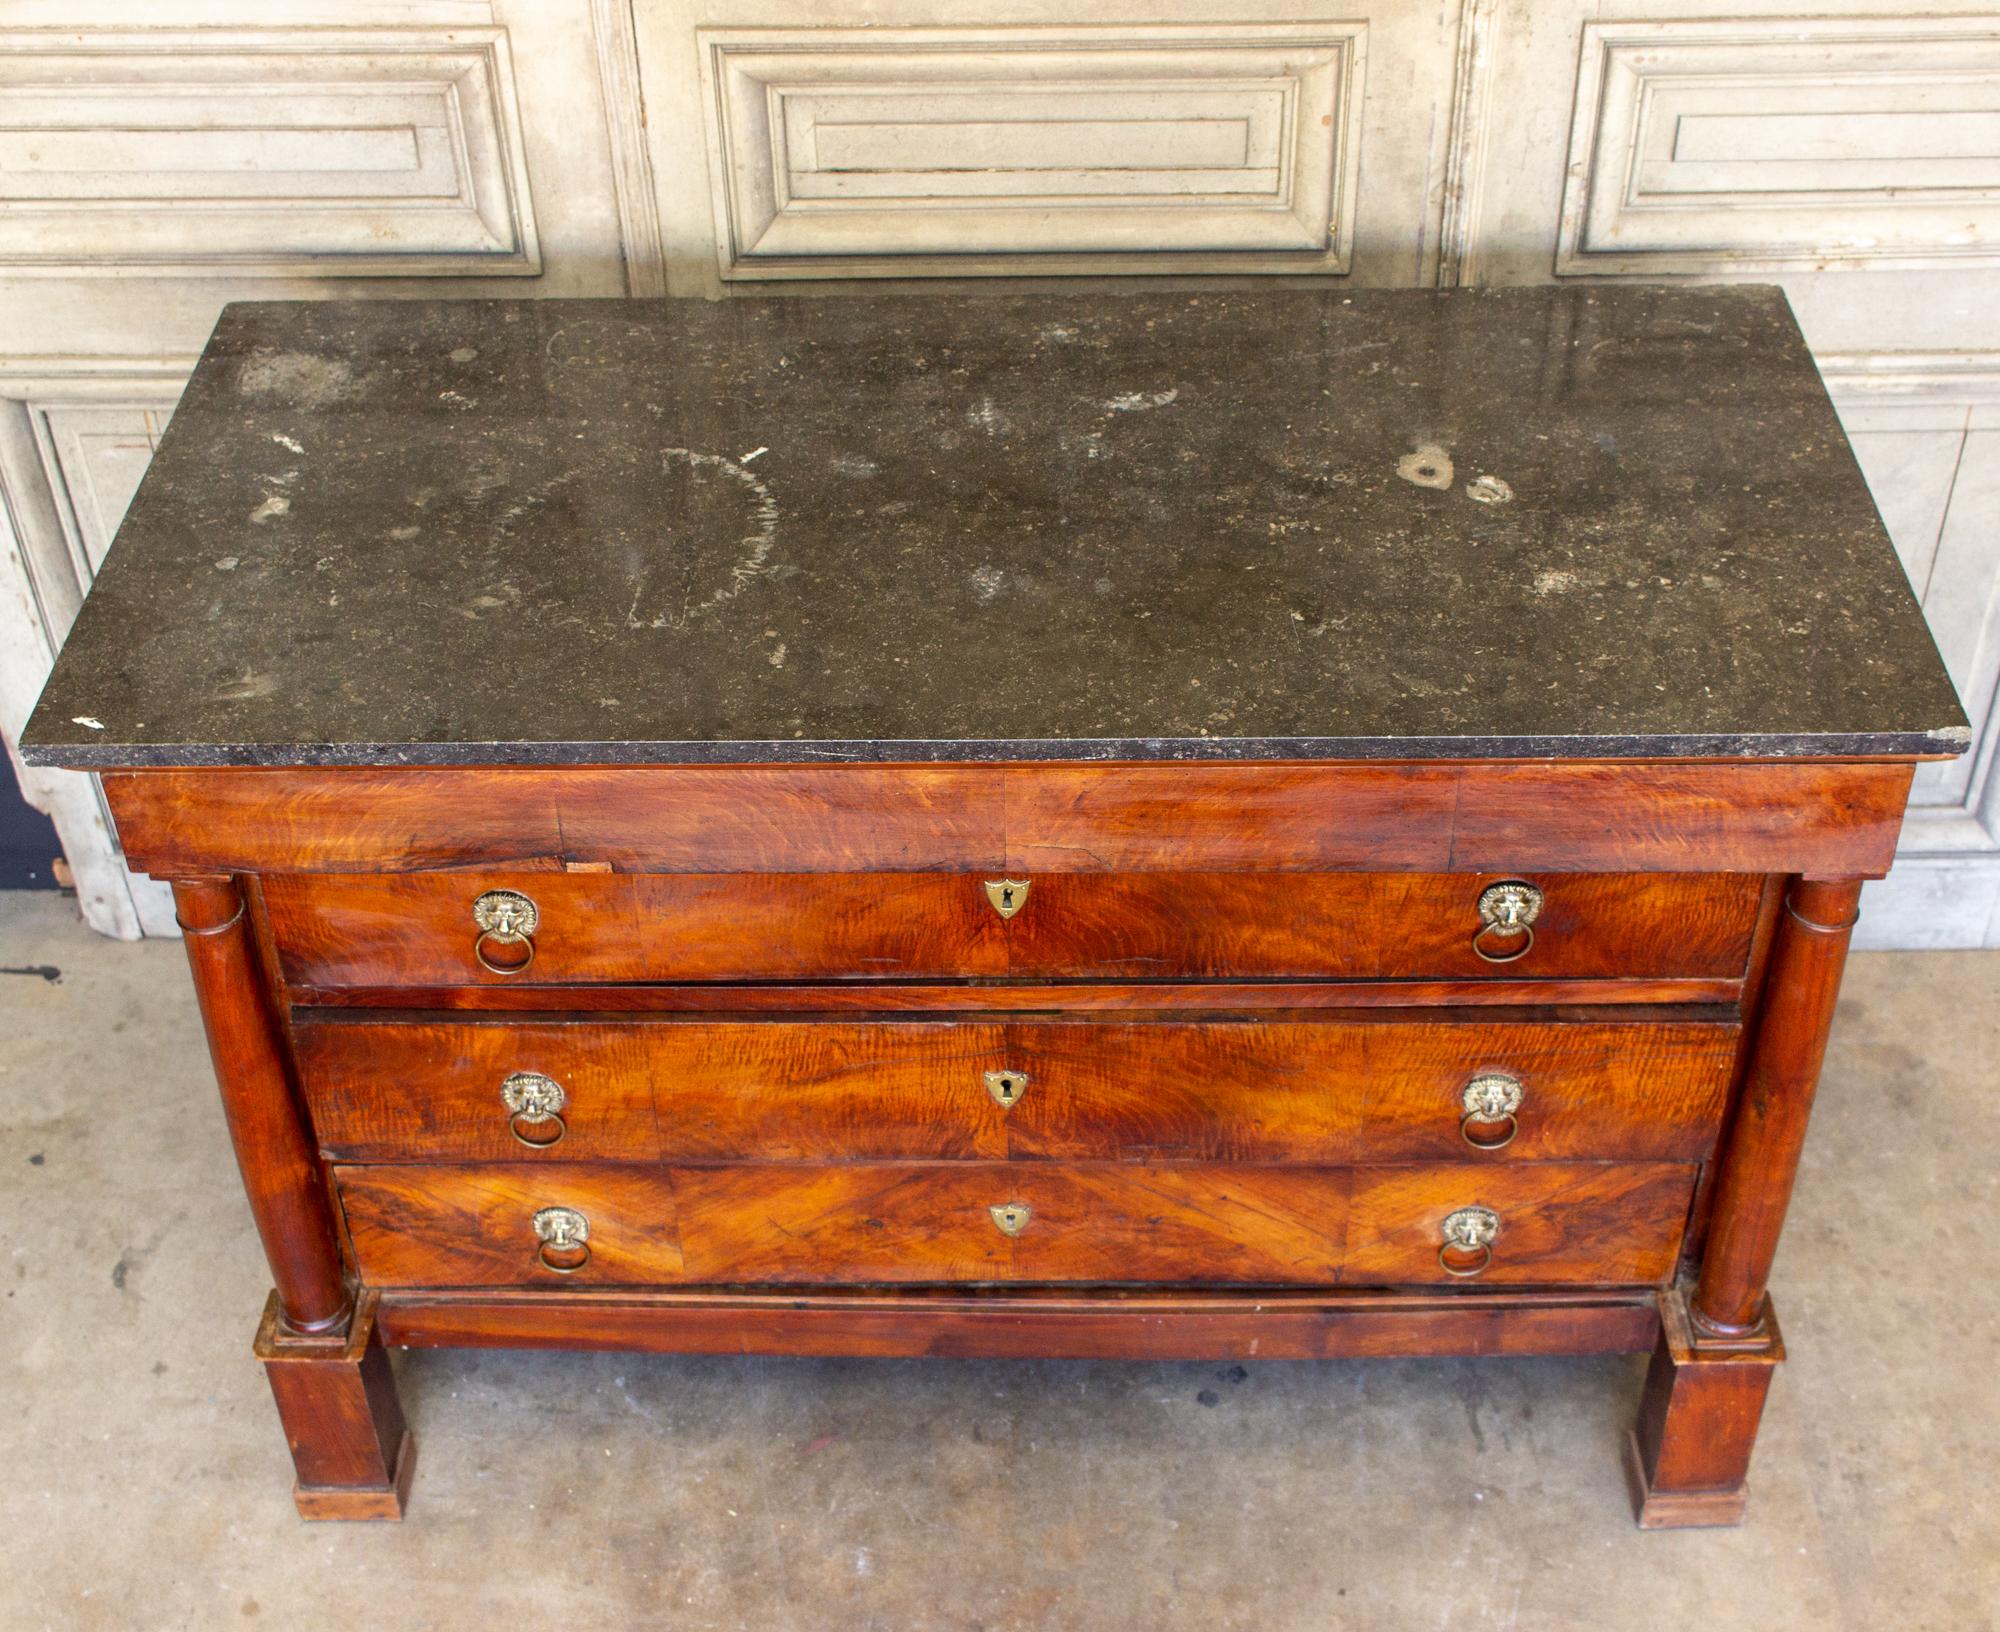 Empire Revival Antique French Empire Style Chest with Fossilized Marble Top & Lion Hardware